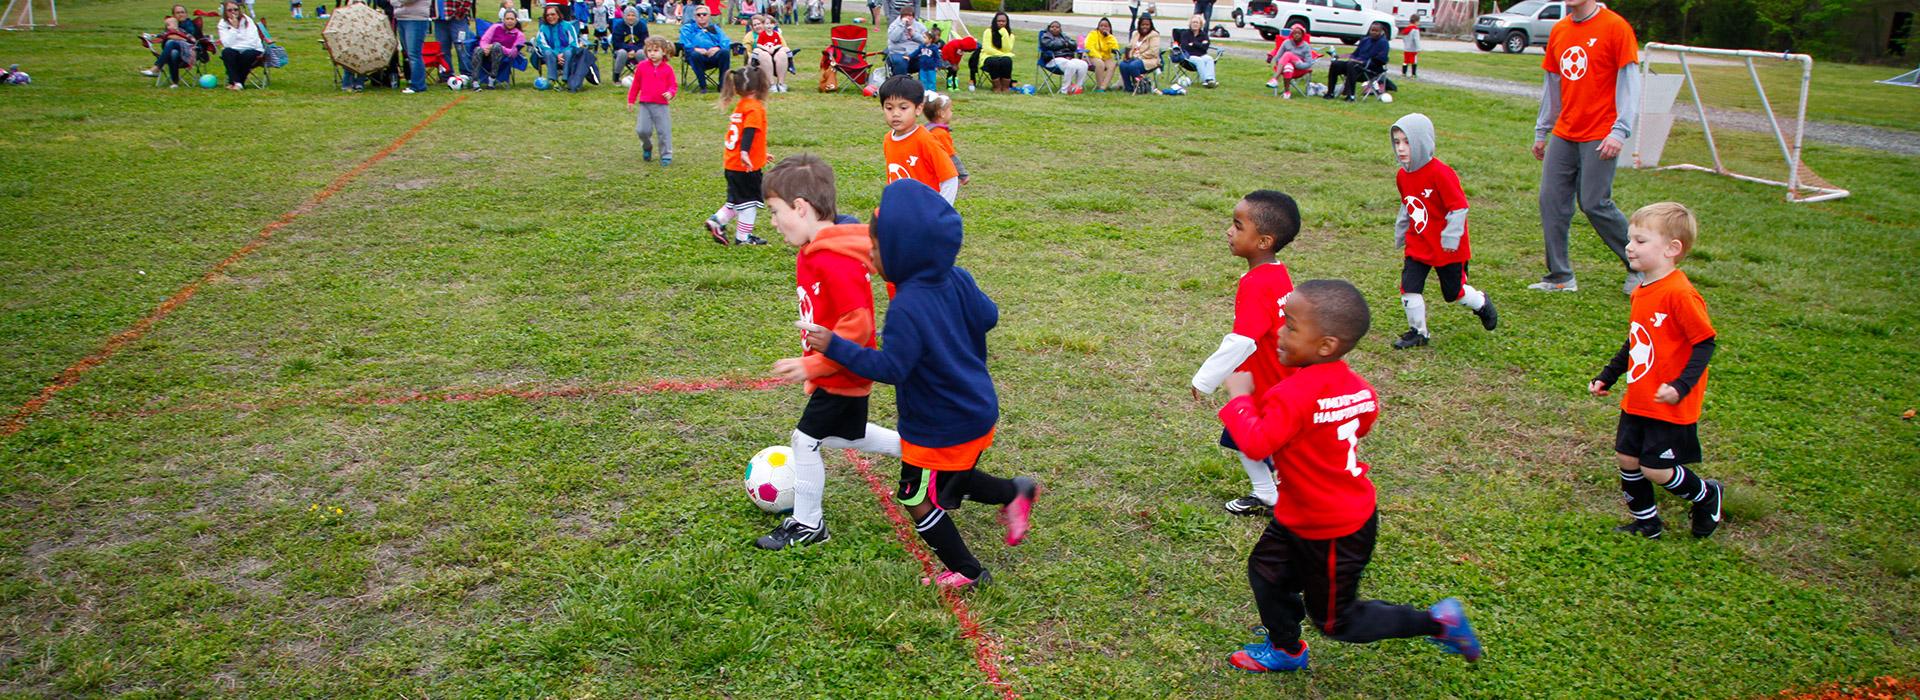 Greenbrier Family YMCA kids playing soccer